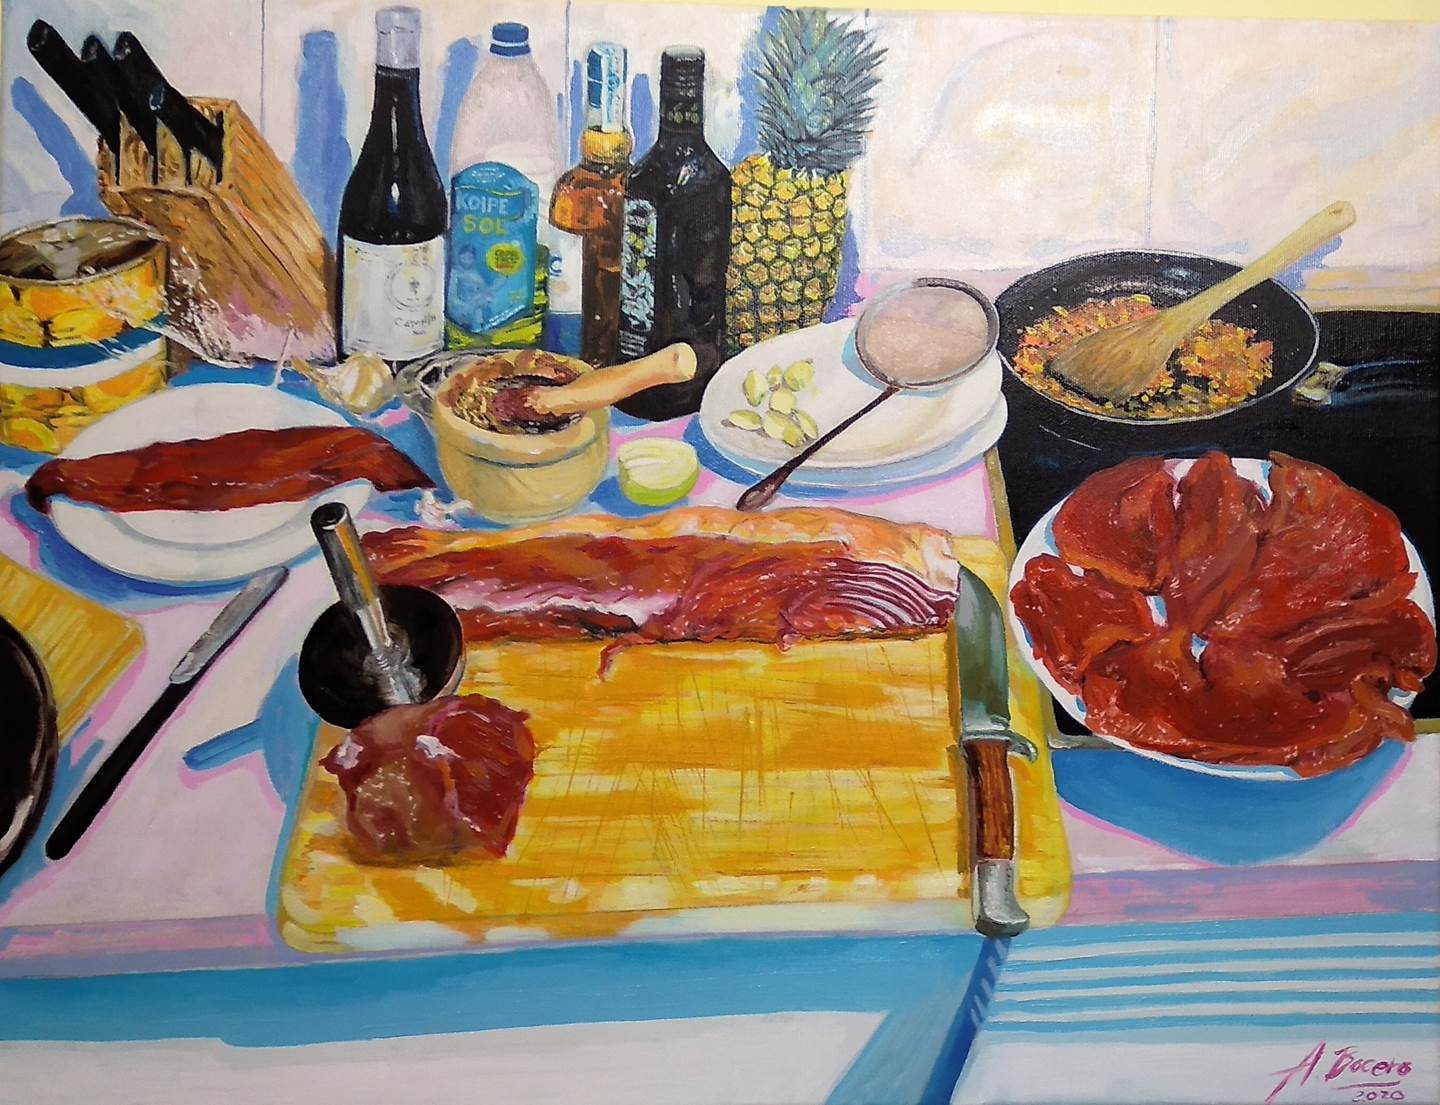 Best 11 The Meat, original Nature Canvas Painting by Antonio Bocero